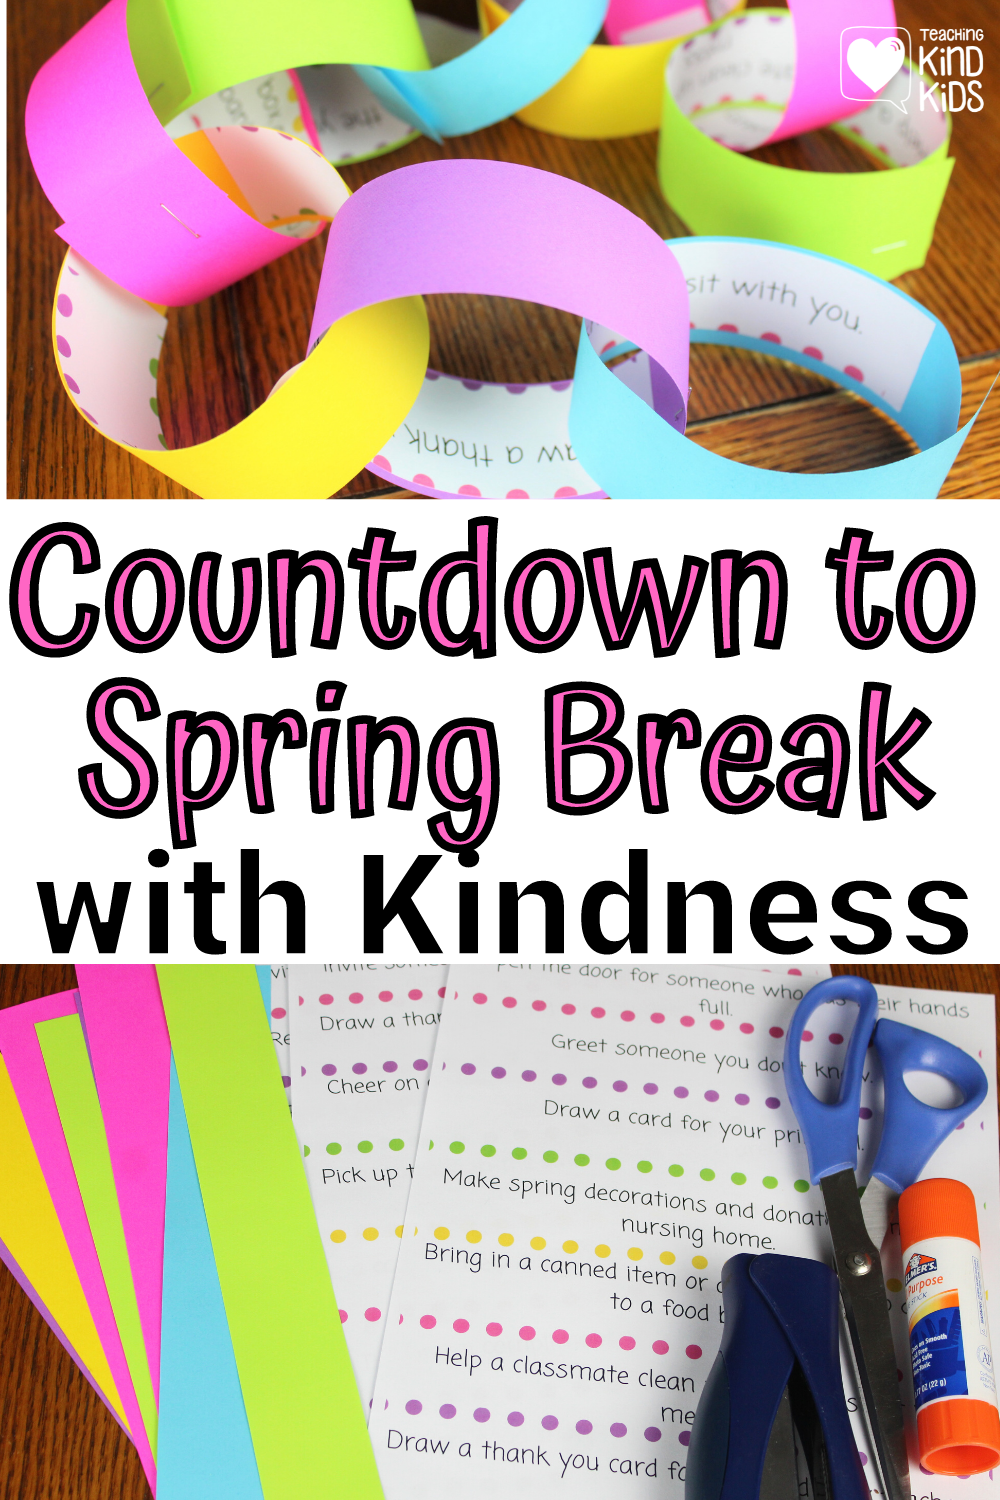 Countdown to spring break with these acts of kindness that makes spring a kind place in your classroom.